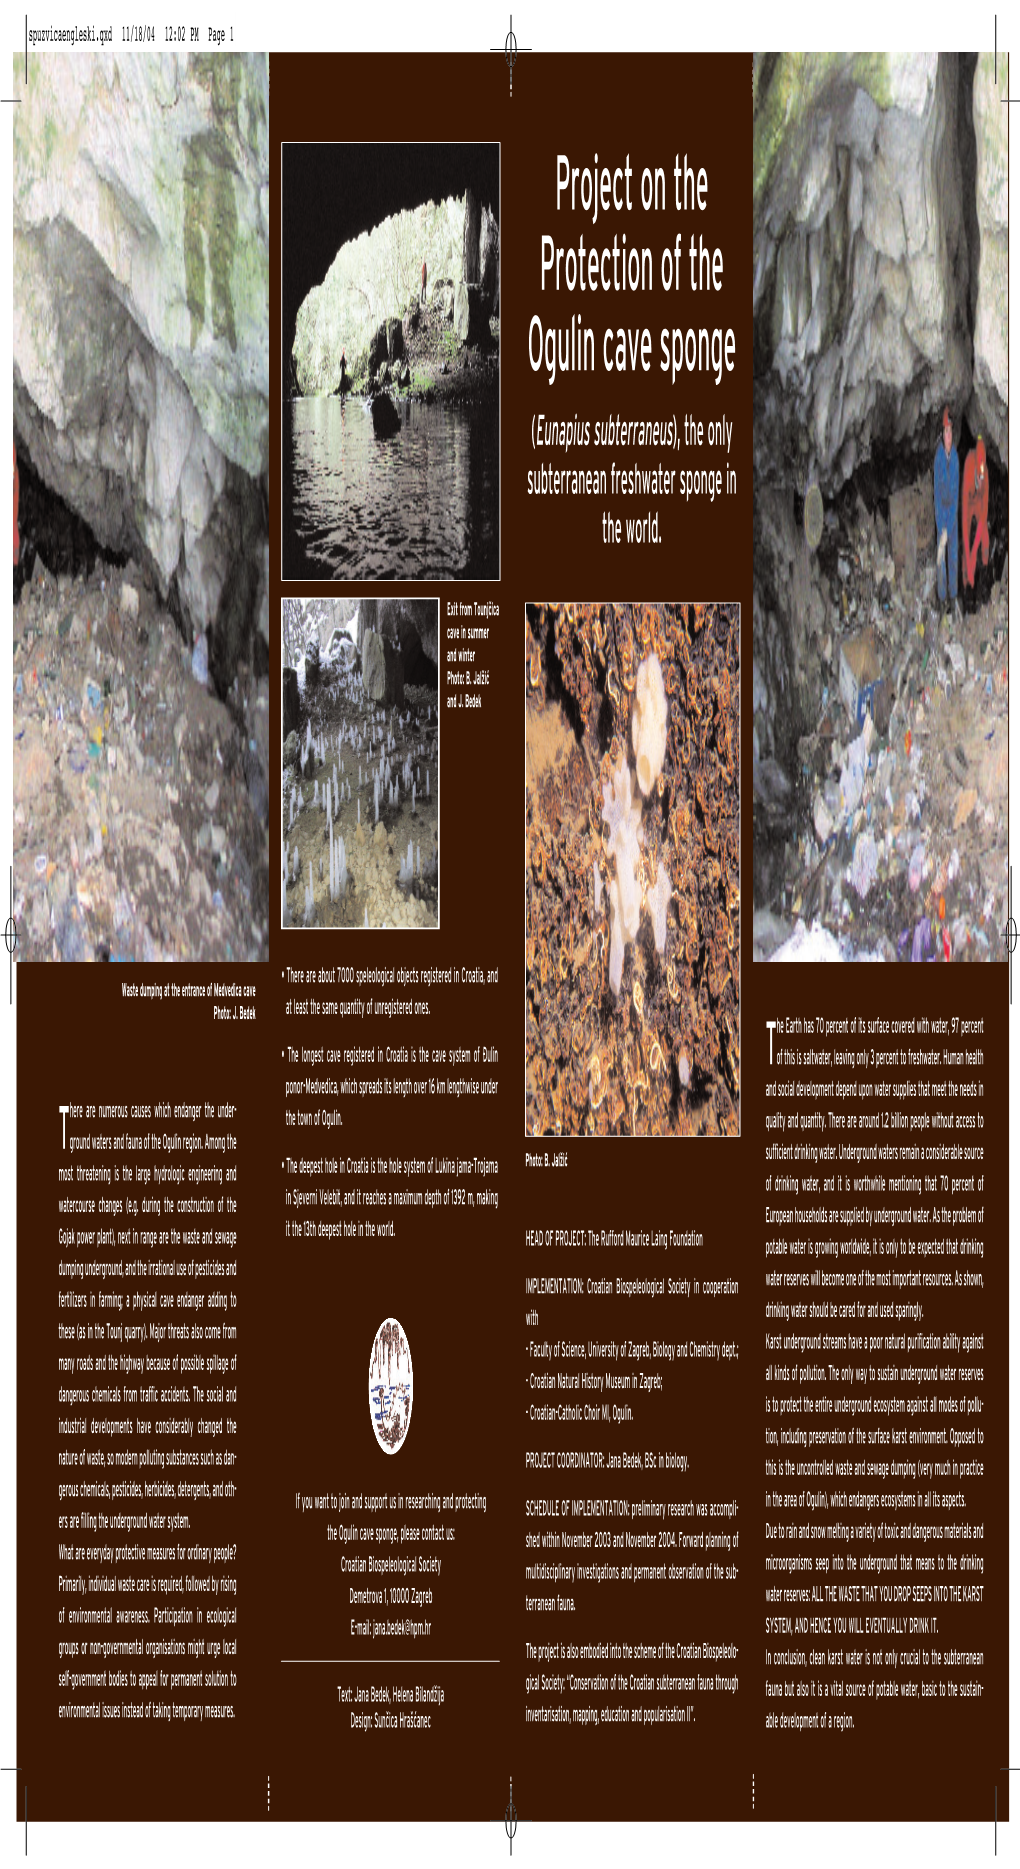 Project on the Protection of the Ogulin Cave Sponge (Eunapius Subterraneus), the Only Subterranean Freshwater Sponge in the World